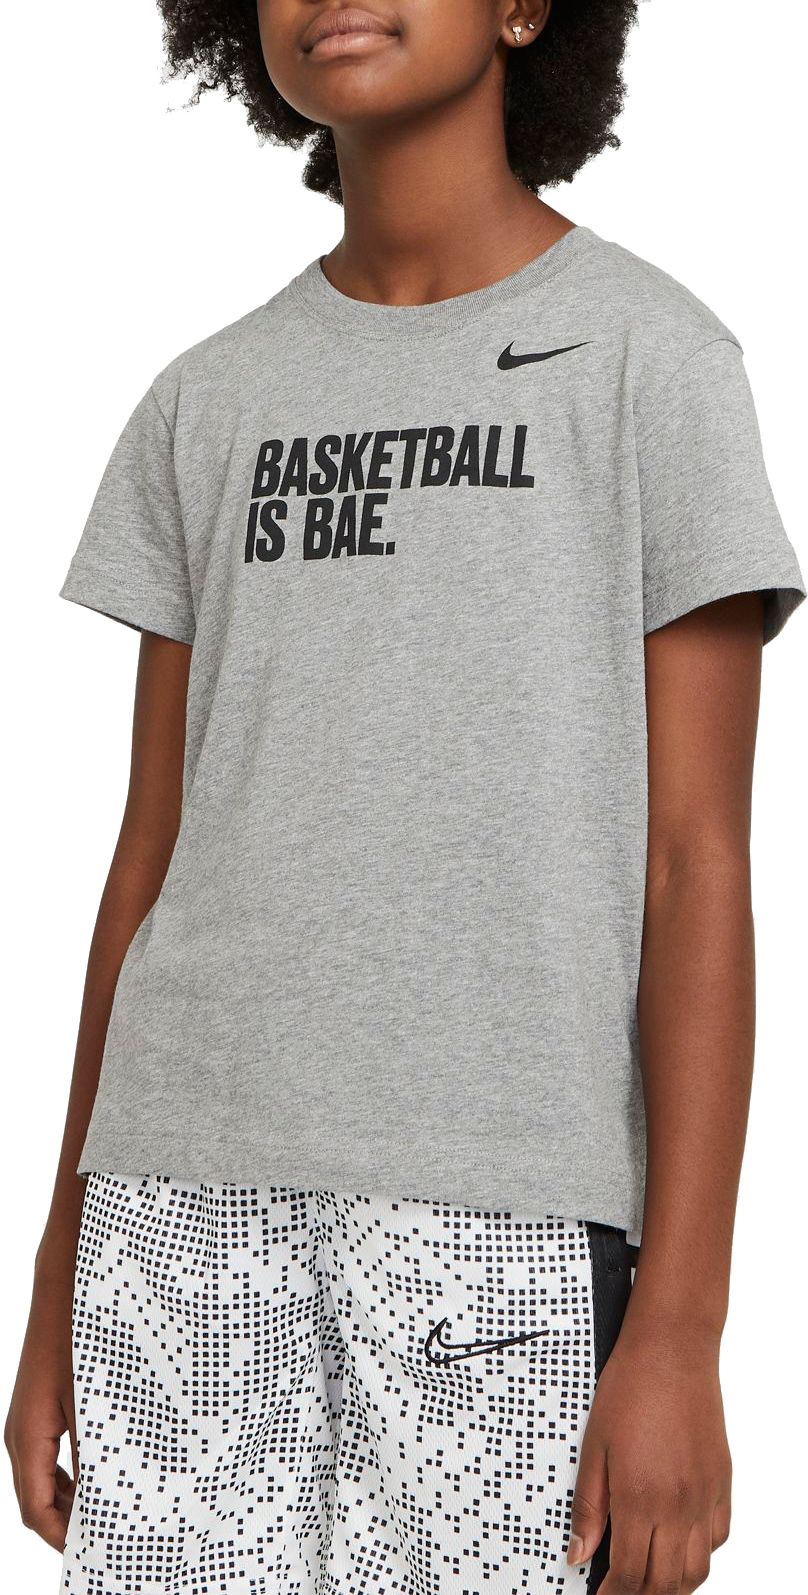 Nike Basketball Graphic T-Shirt in Black